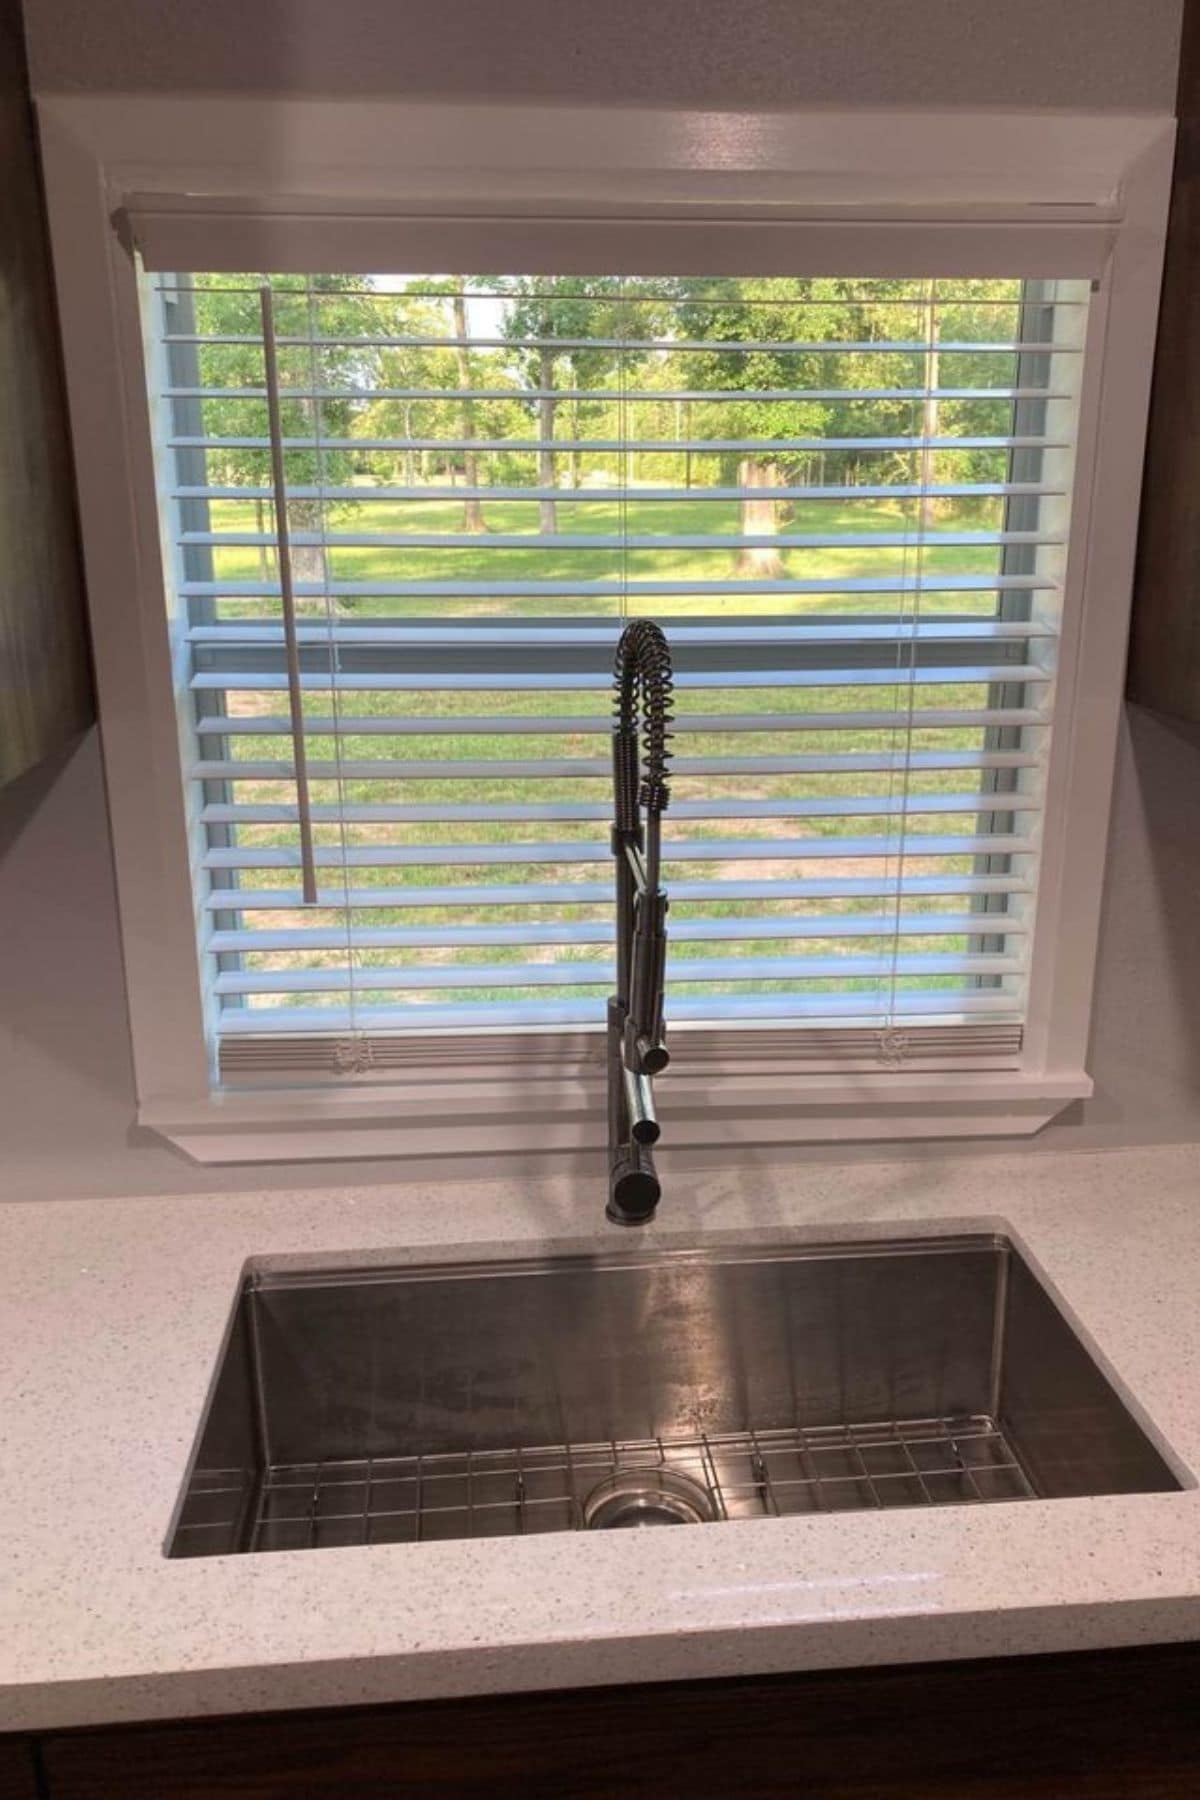 Deep stainless stell sink with rack